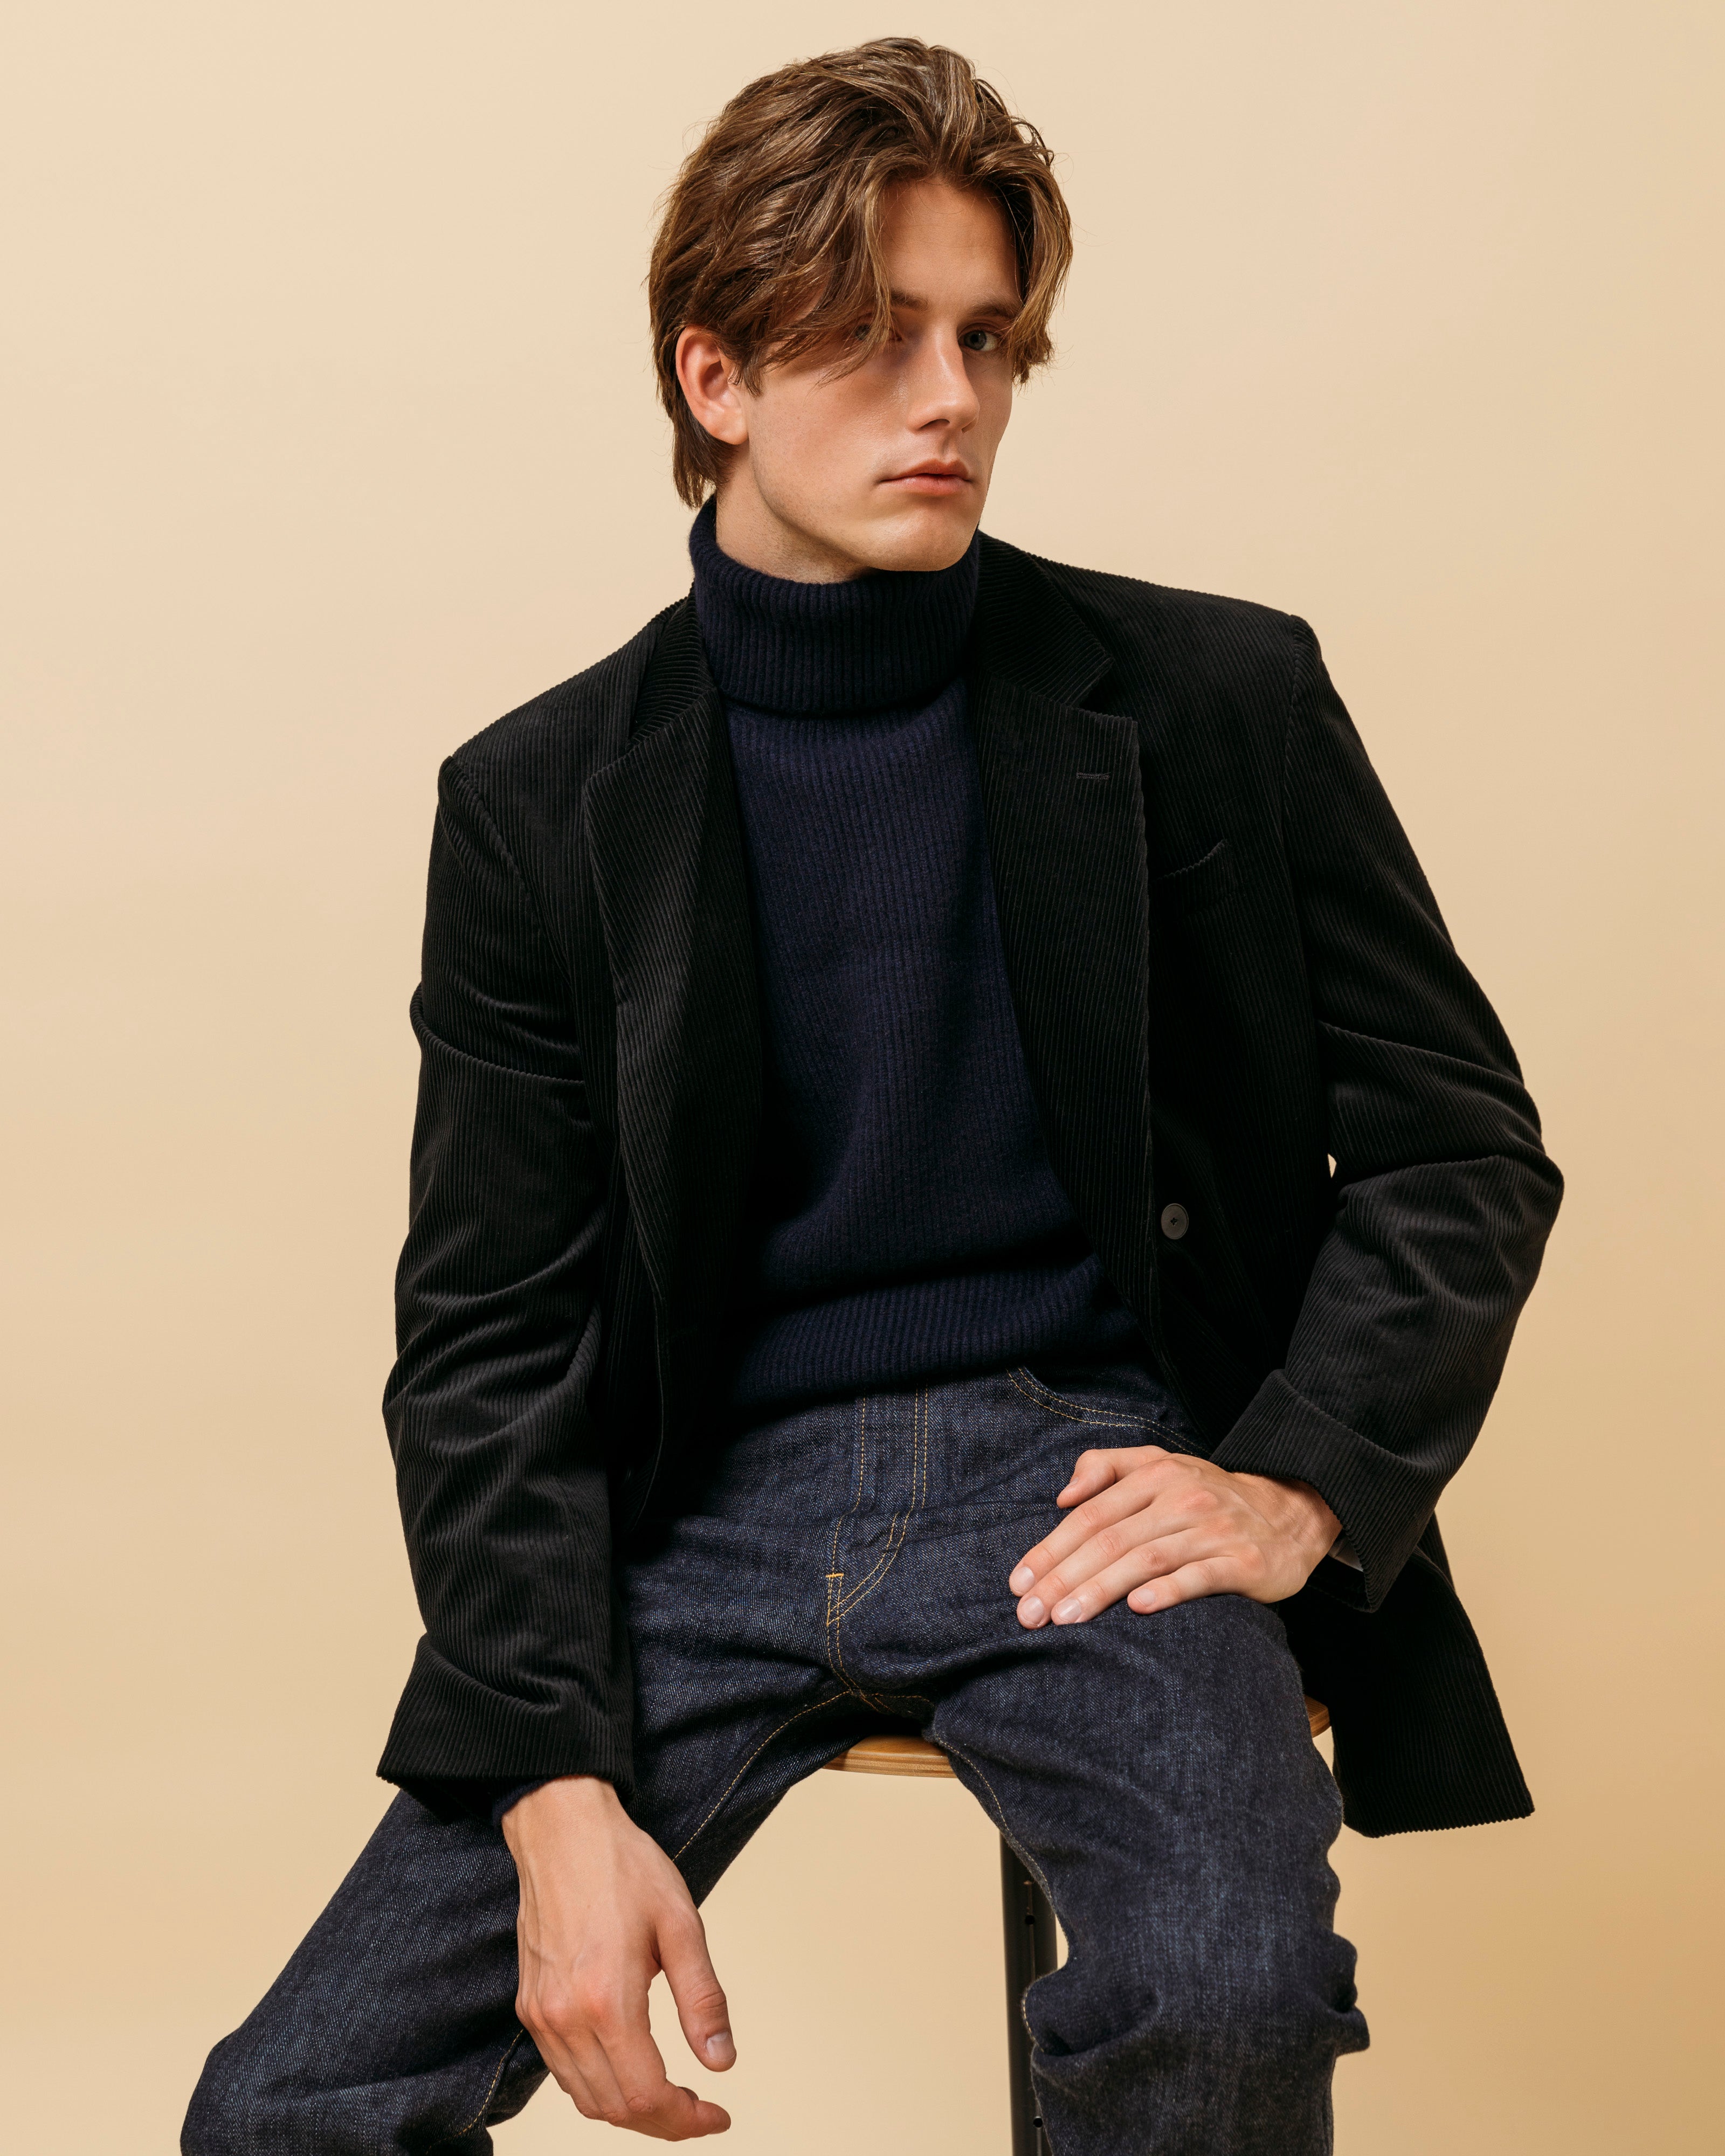 Cashmere ribbed submariner rollneck in navy